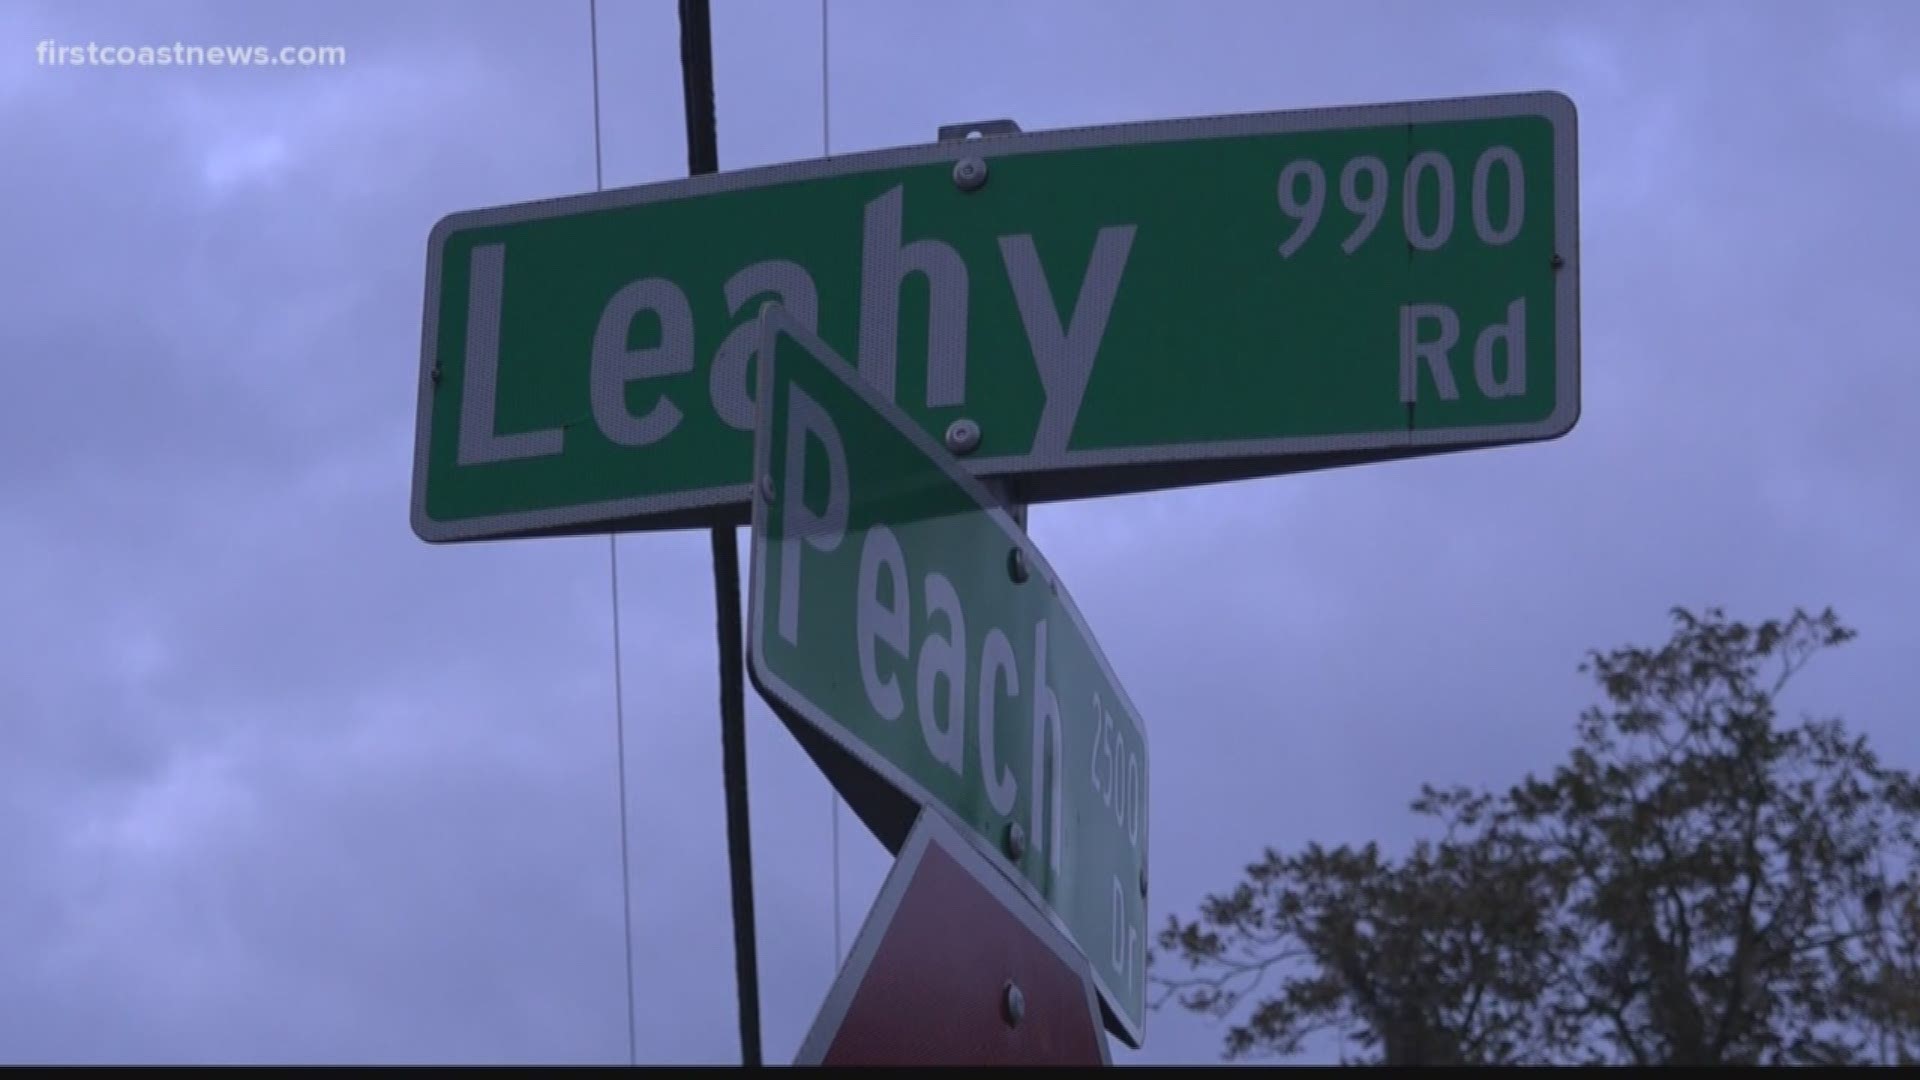 Leahy Road is not what it used to be. Residents said the drainage system is causing several safety hazards for drivers and pedestrians.